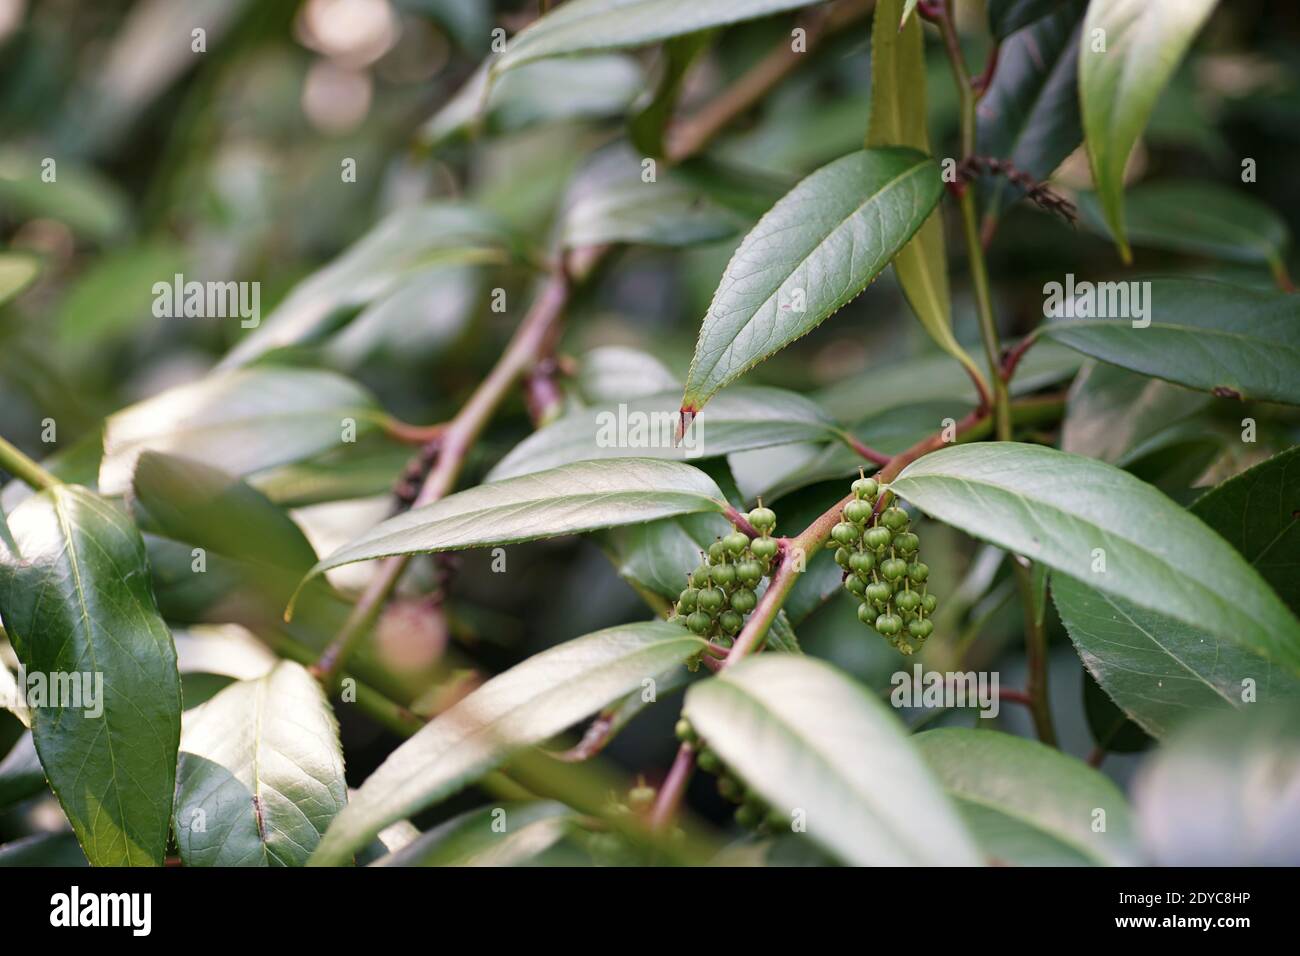 August in the garden, a branch with fruits of highland doghobble among green leaves, bokeh, fuzzy background and copy space Stock Photo